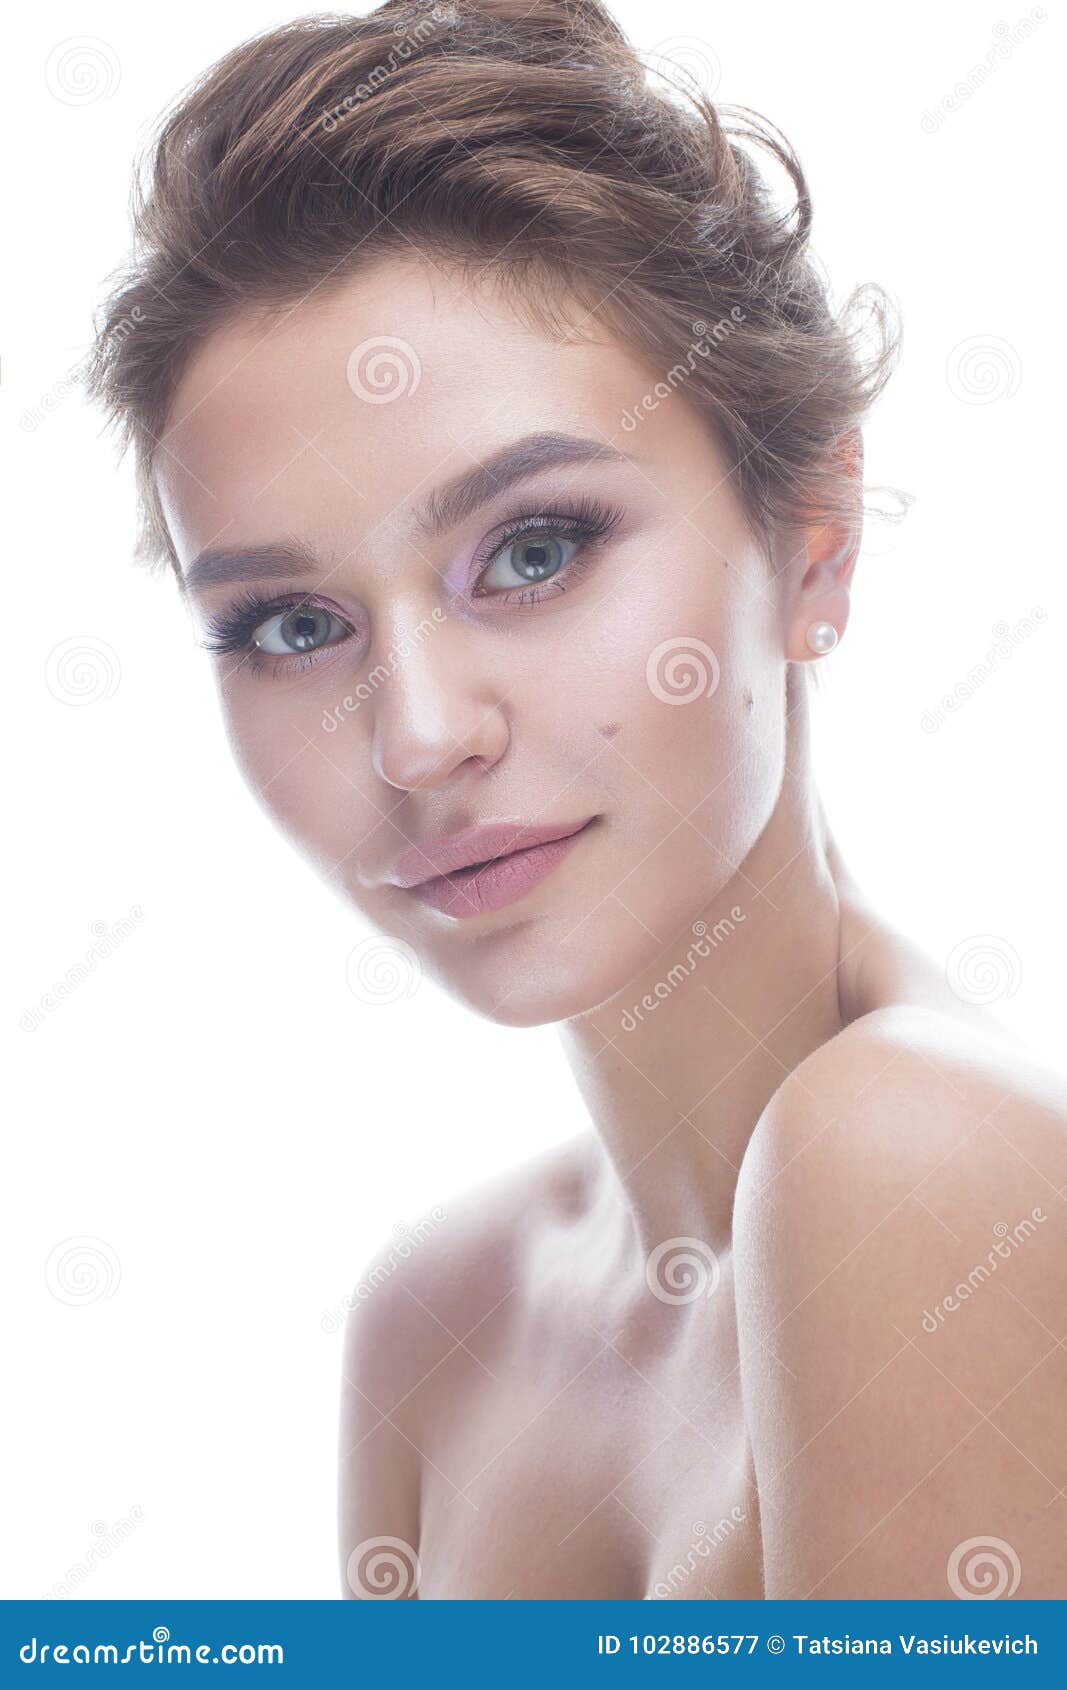 Nude girl models face